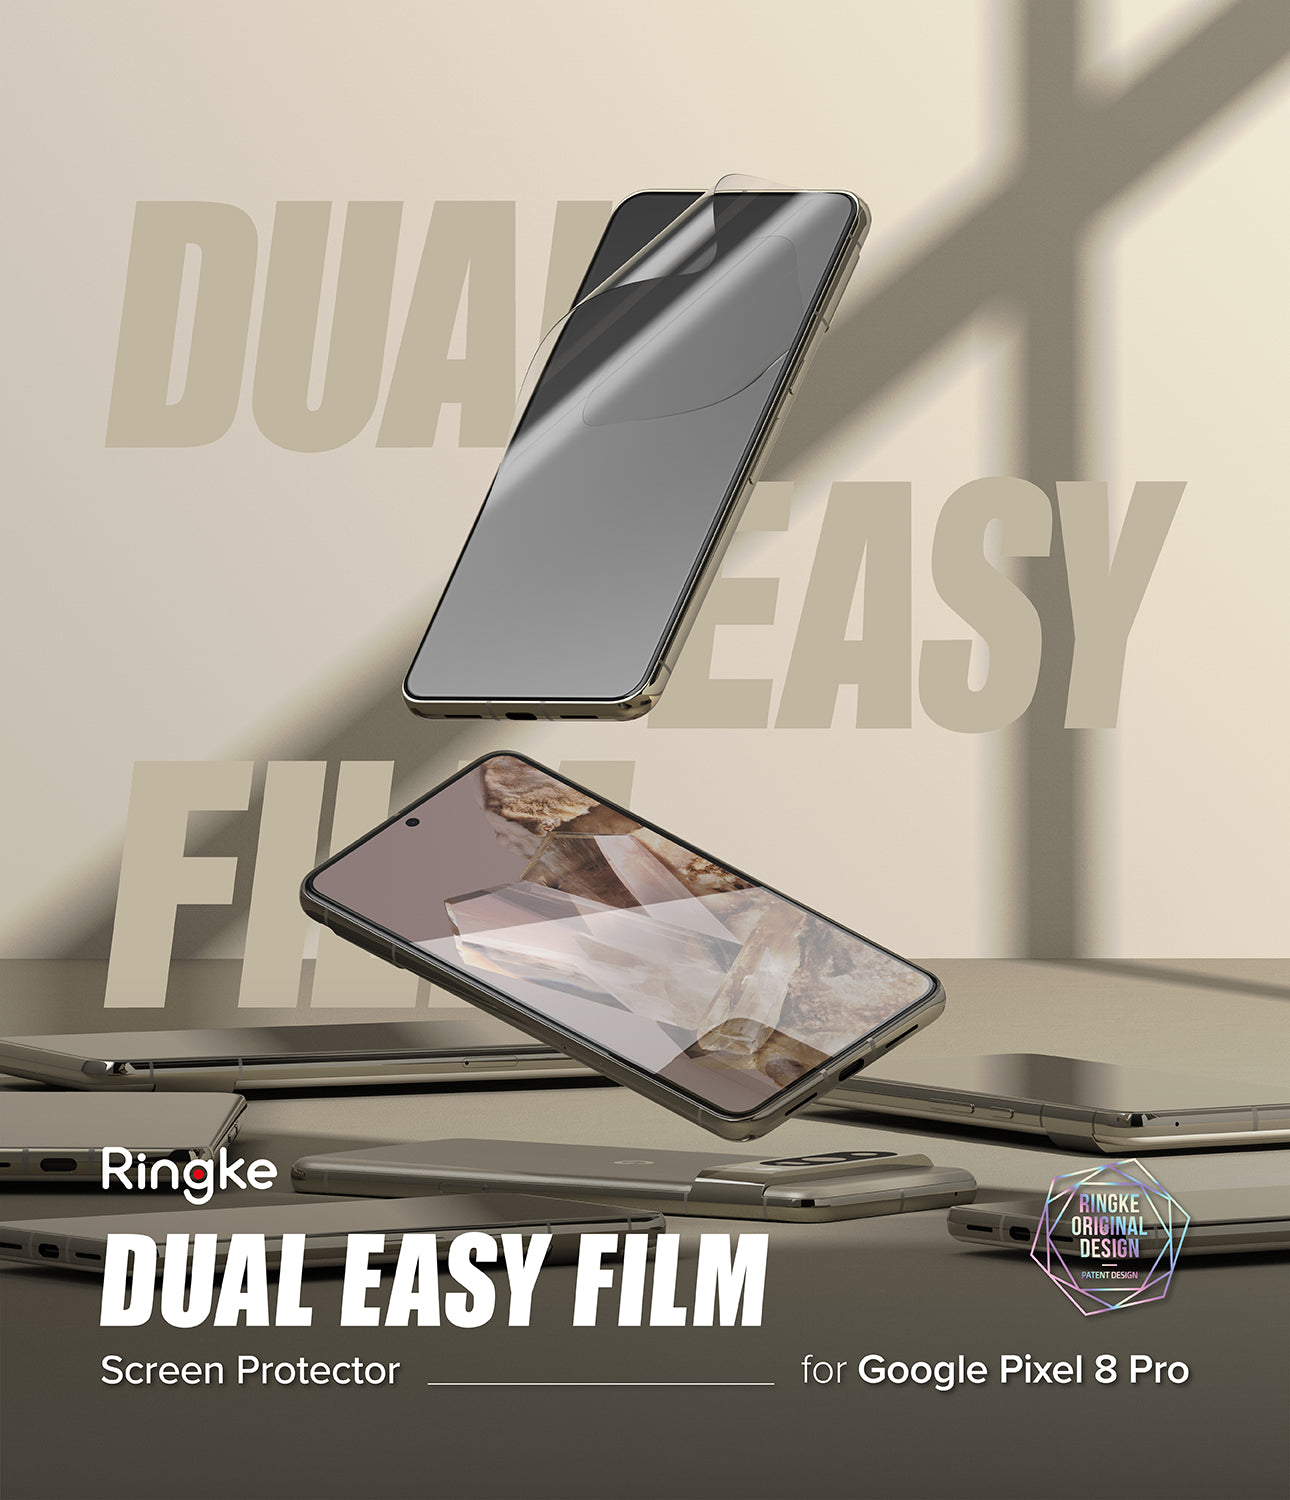 Google Pixel 8 Pro Screen Protector | Dual Easy Film-By Ringke